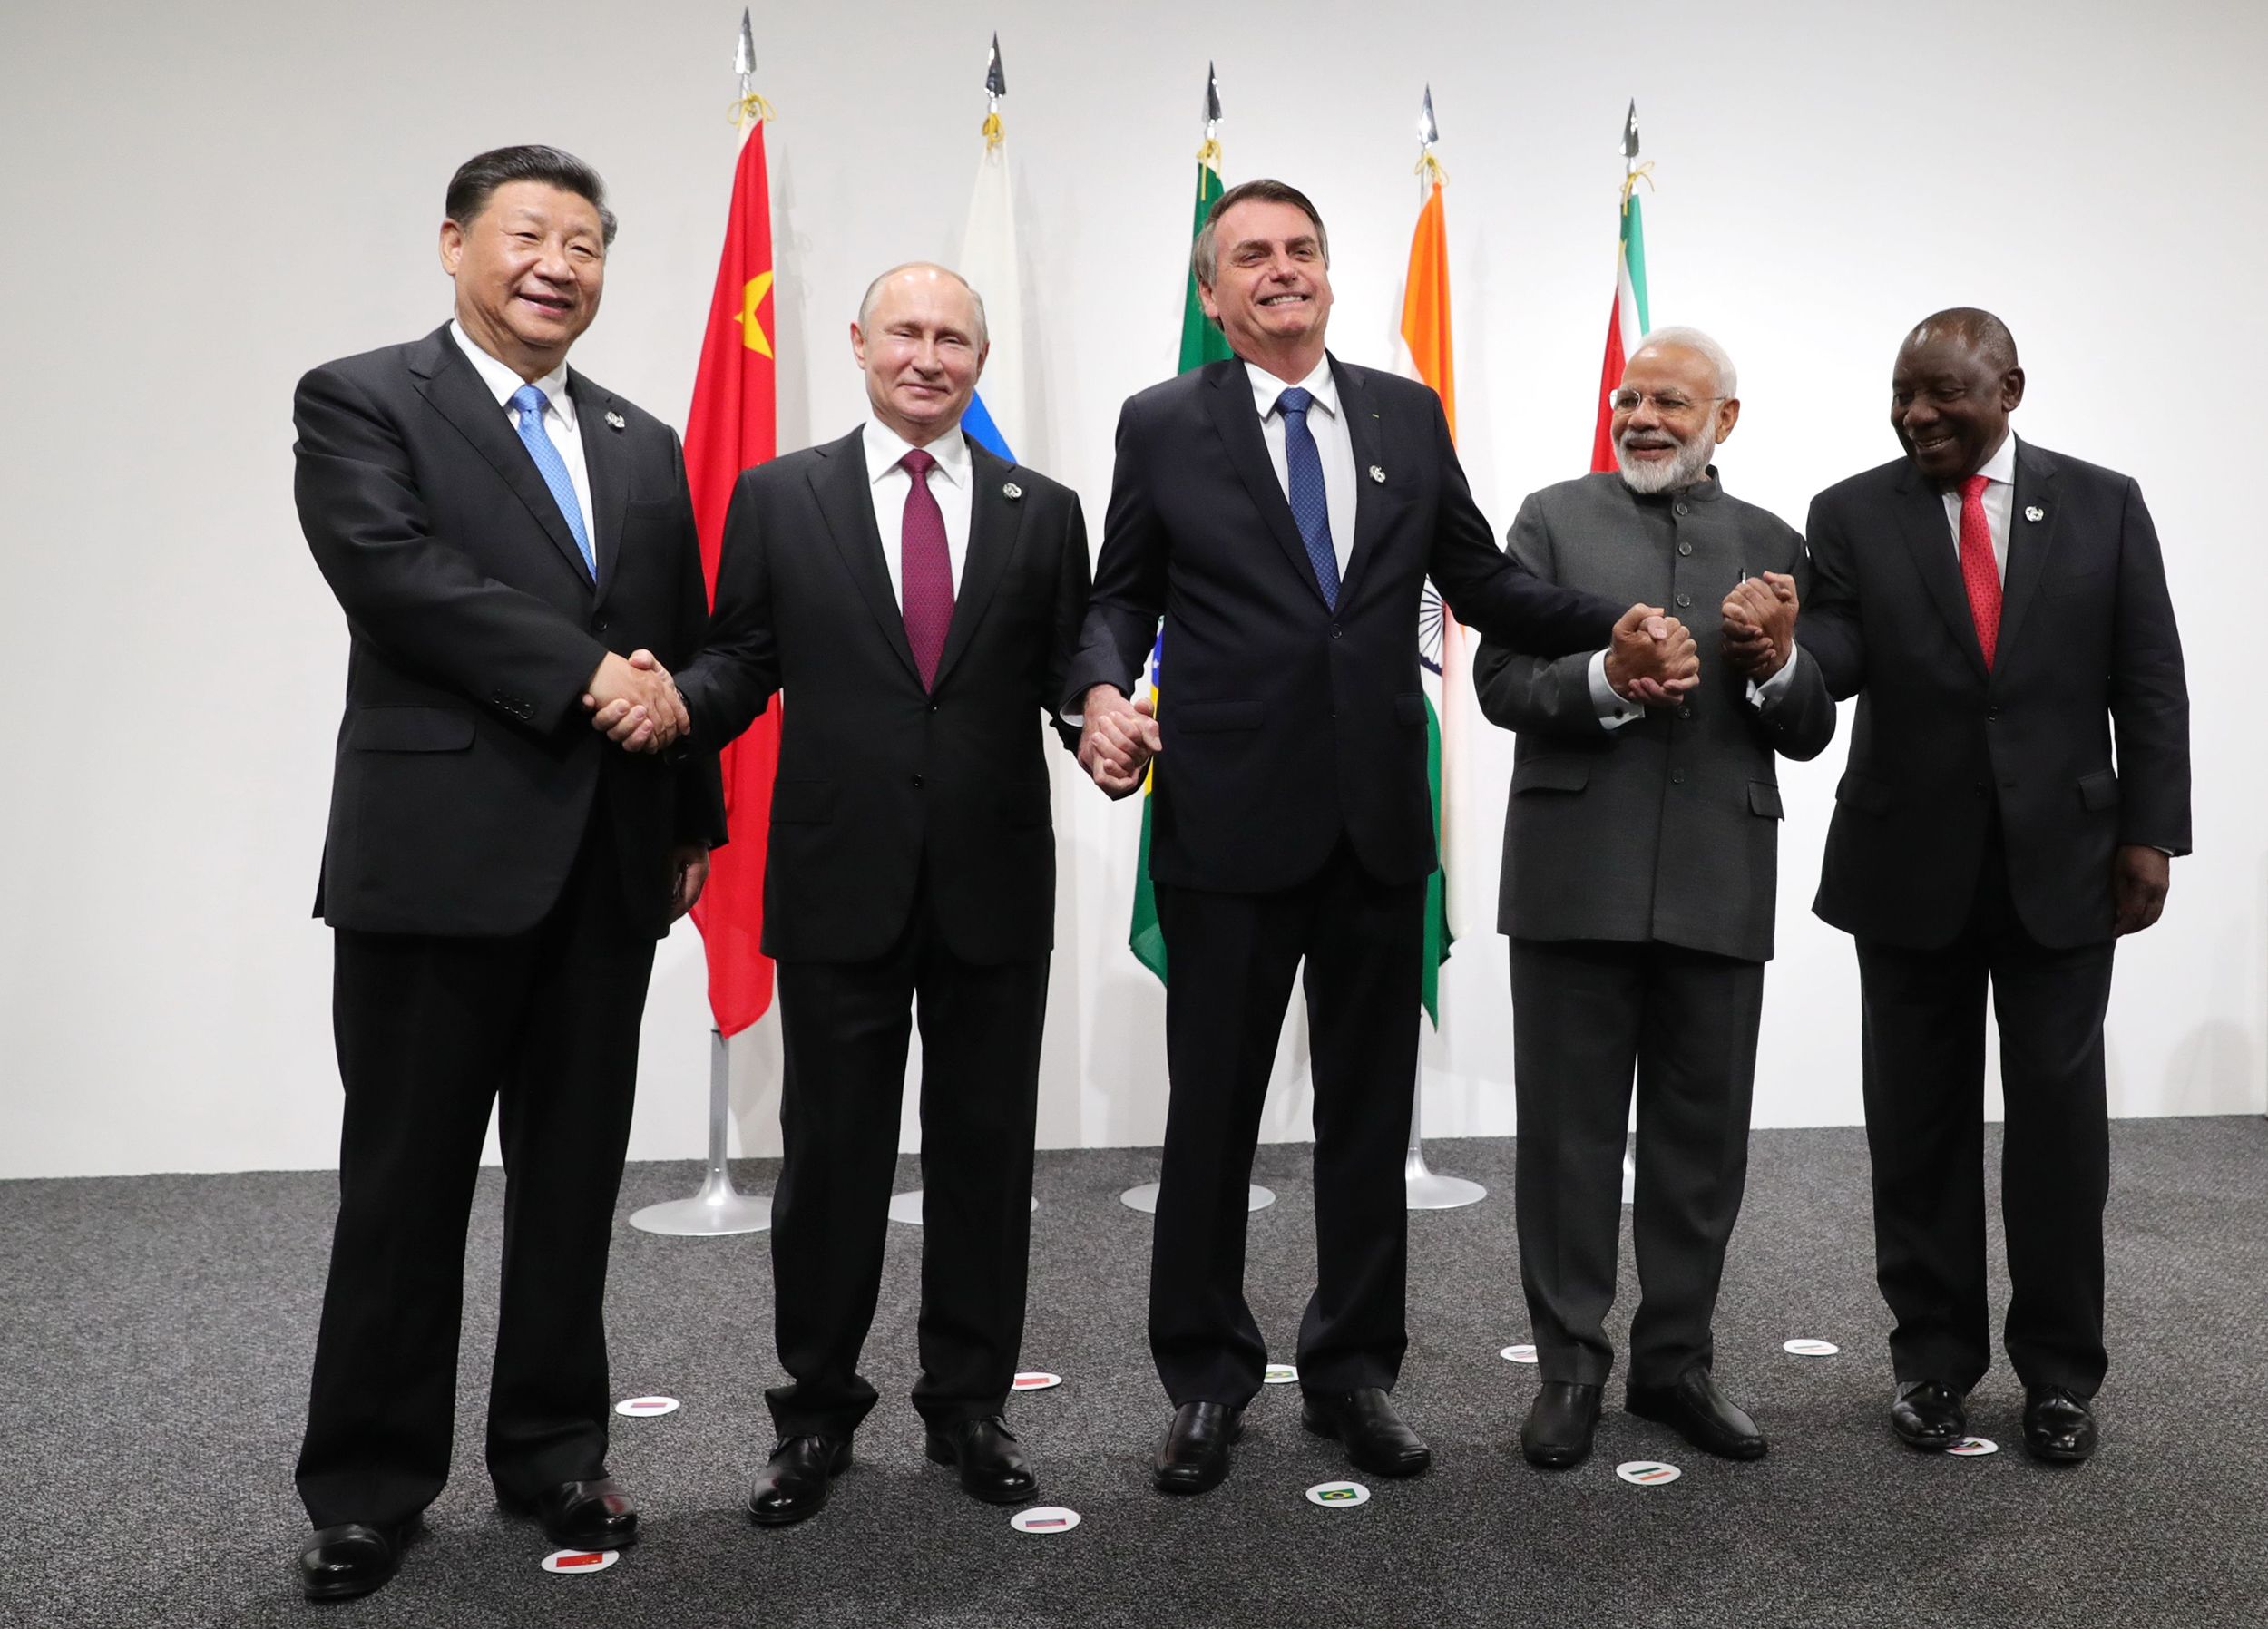 Putin is back on the world stage in BRICS, China-hosted summit | CNN